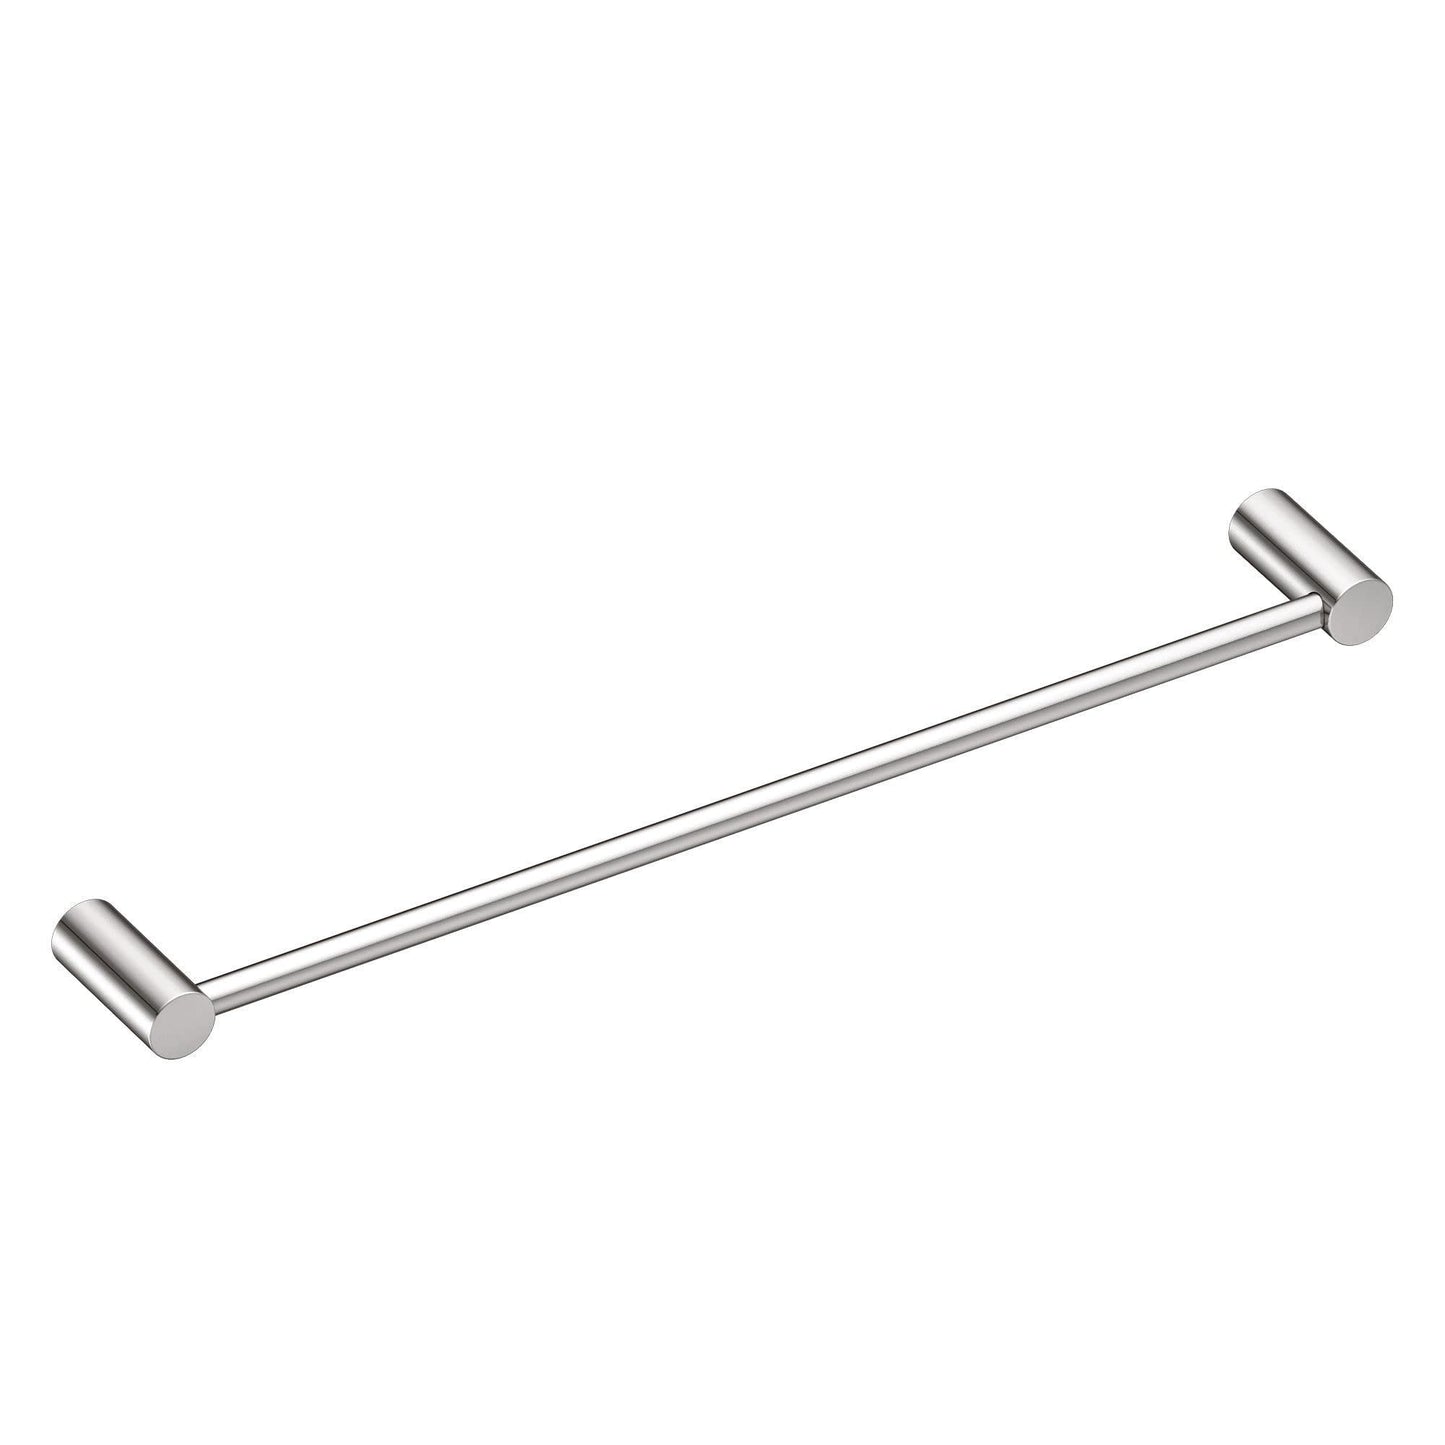 Moen 24-in Align Modern Wall Mounted Chrome Towel Bar Accessory, Sturdy Contemporary Design for Bathroom Towel Storage and Organization, YB0424CH - Very Good